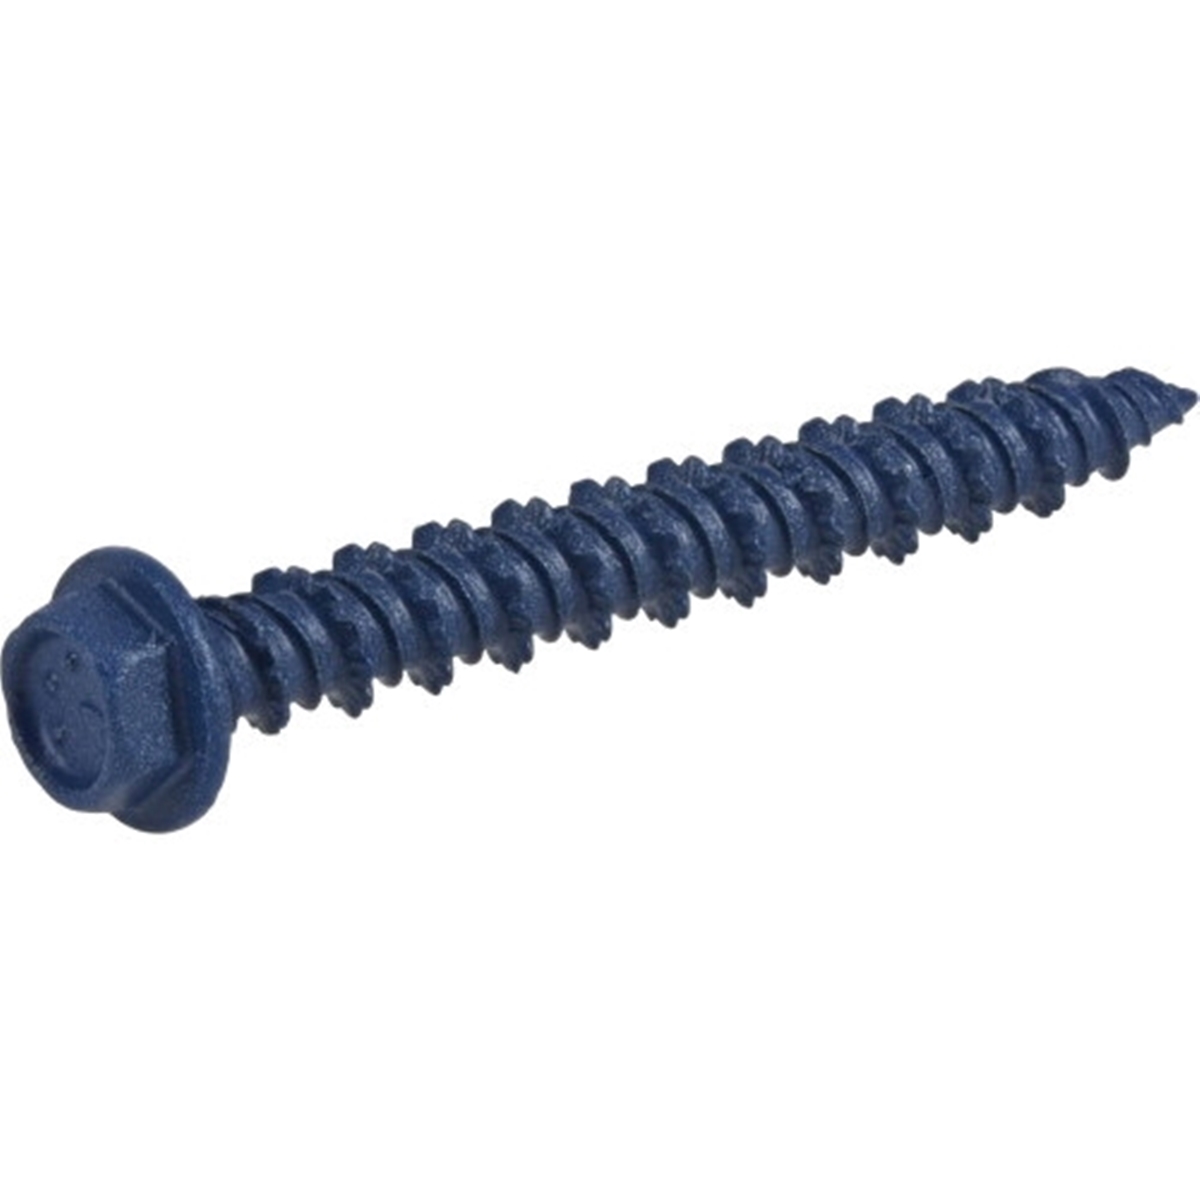 376501 Concrete Screw Anchor, 3/16 in Dia, 1-3/4 in L, Carbon Steel, Epoxy-Coated, 100/PK